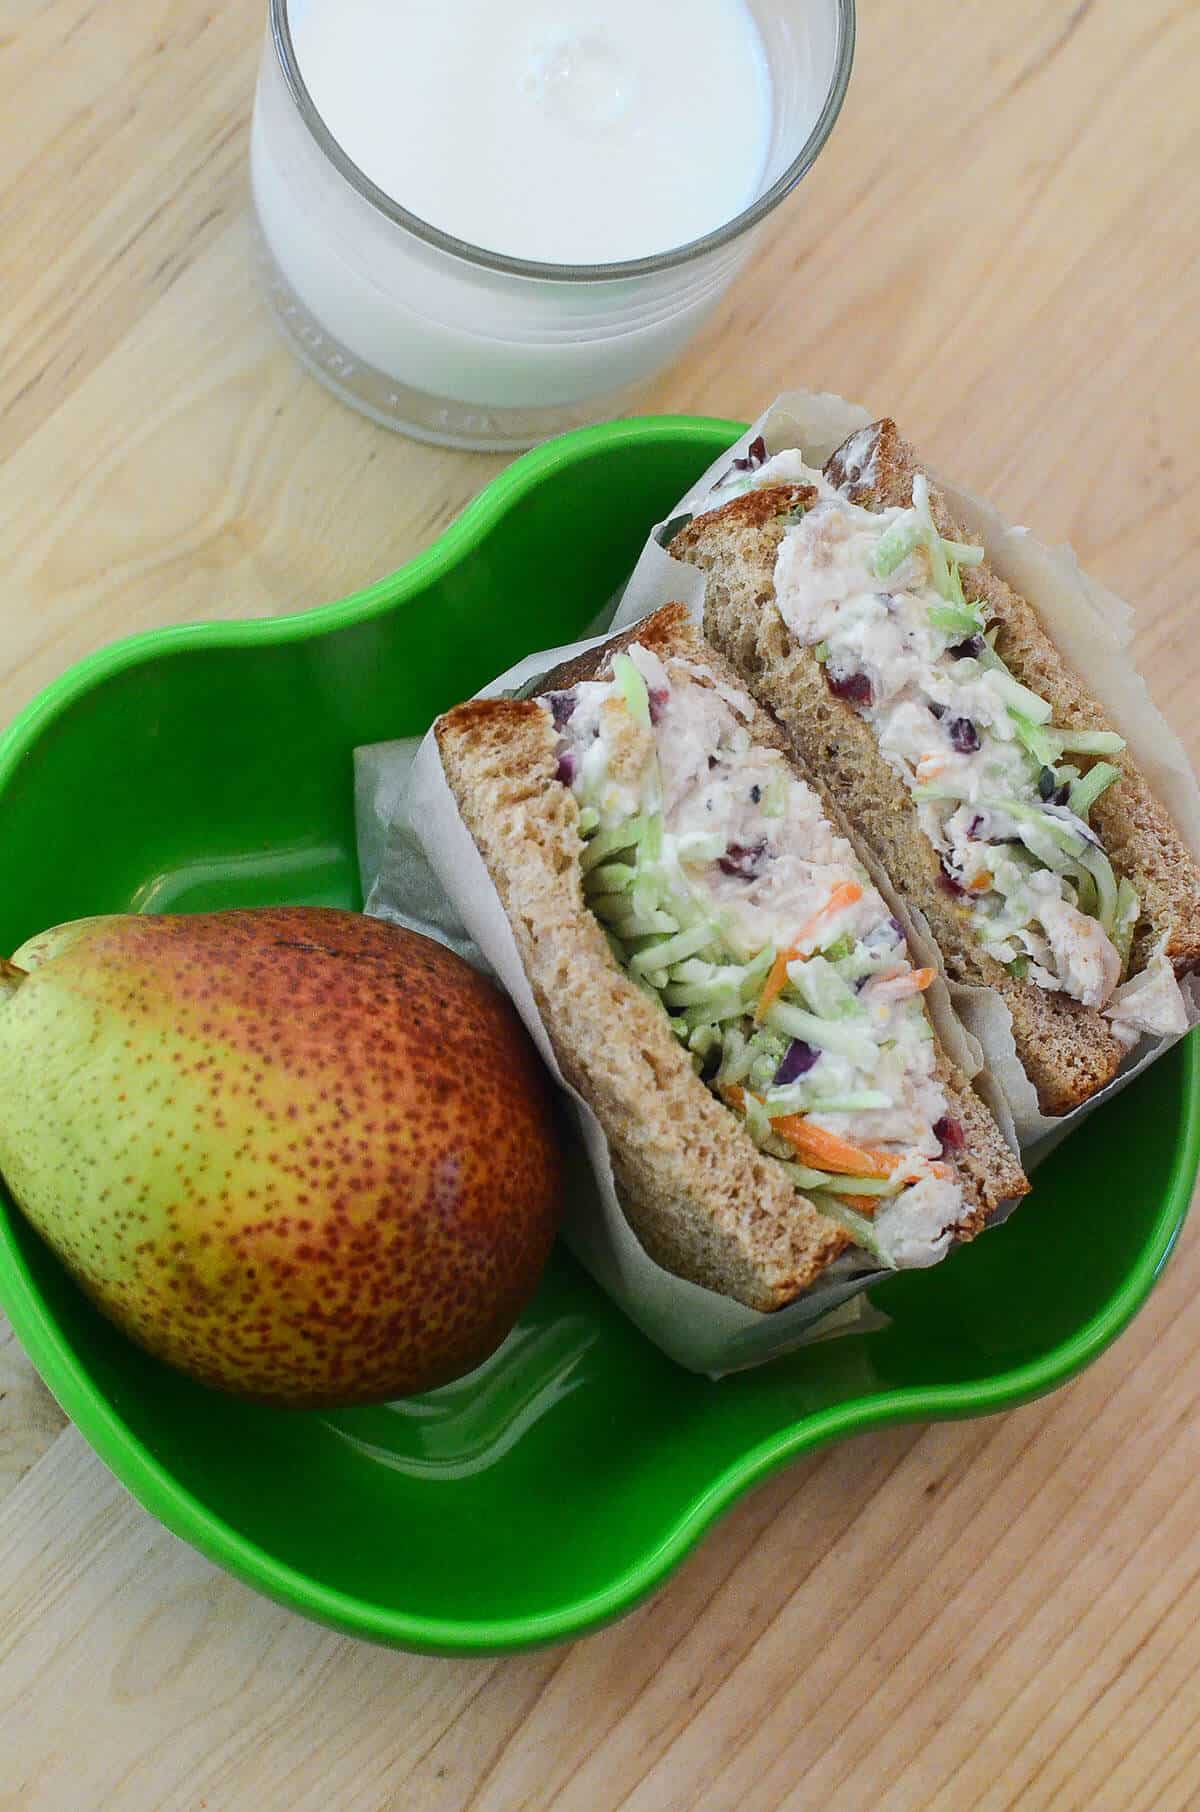 A chicken salad sandwich with broccoli slaw in a green container shot from above.